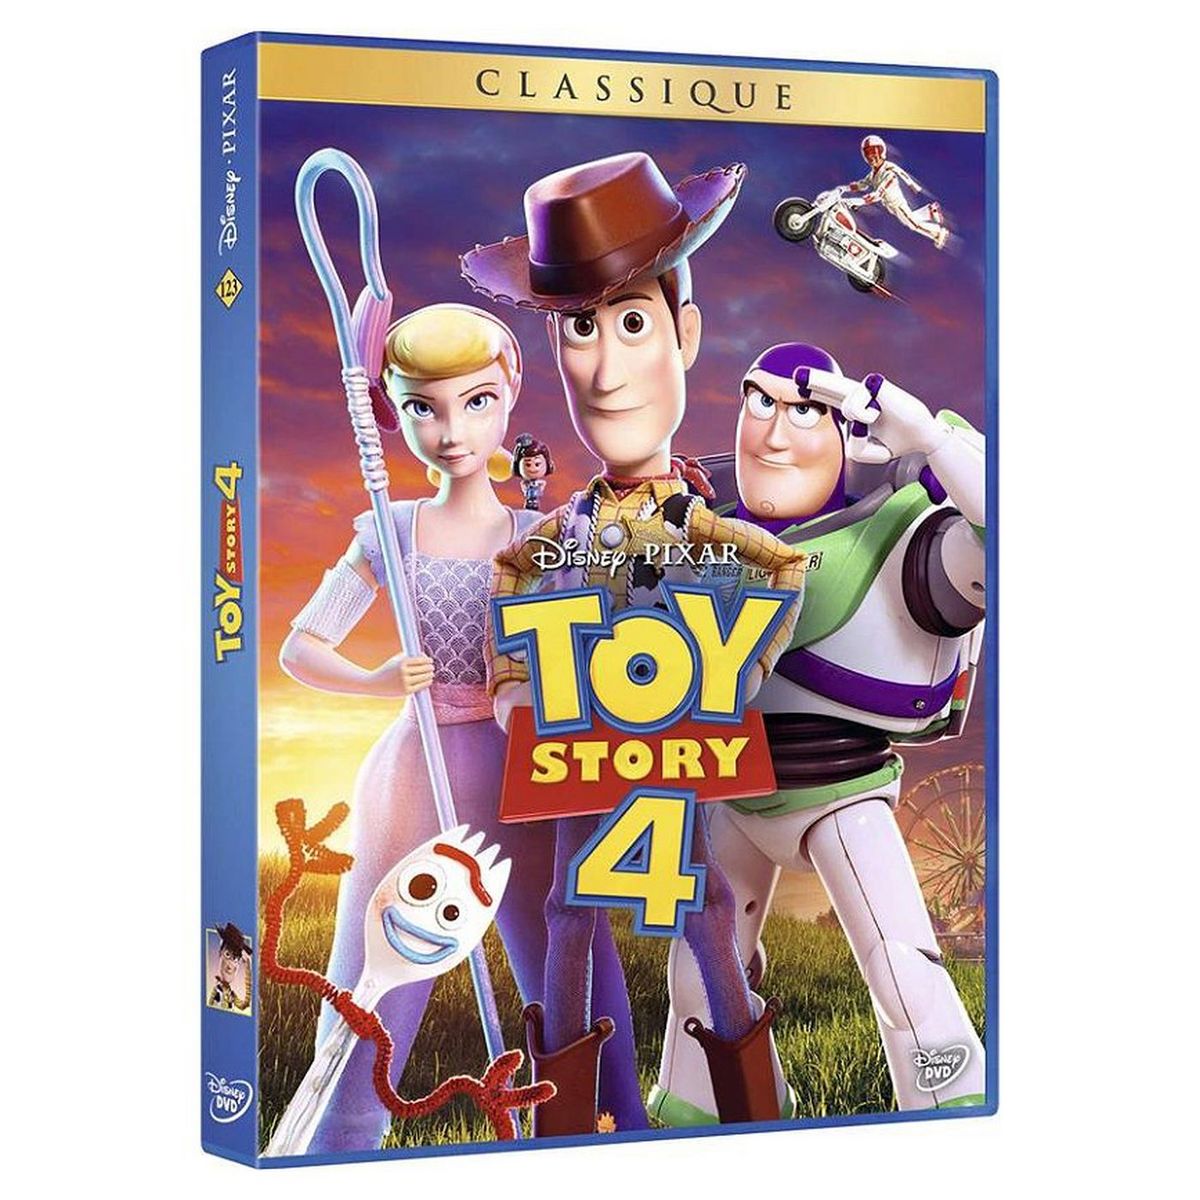 Toy-Story 4 DVD